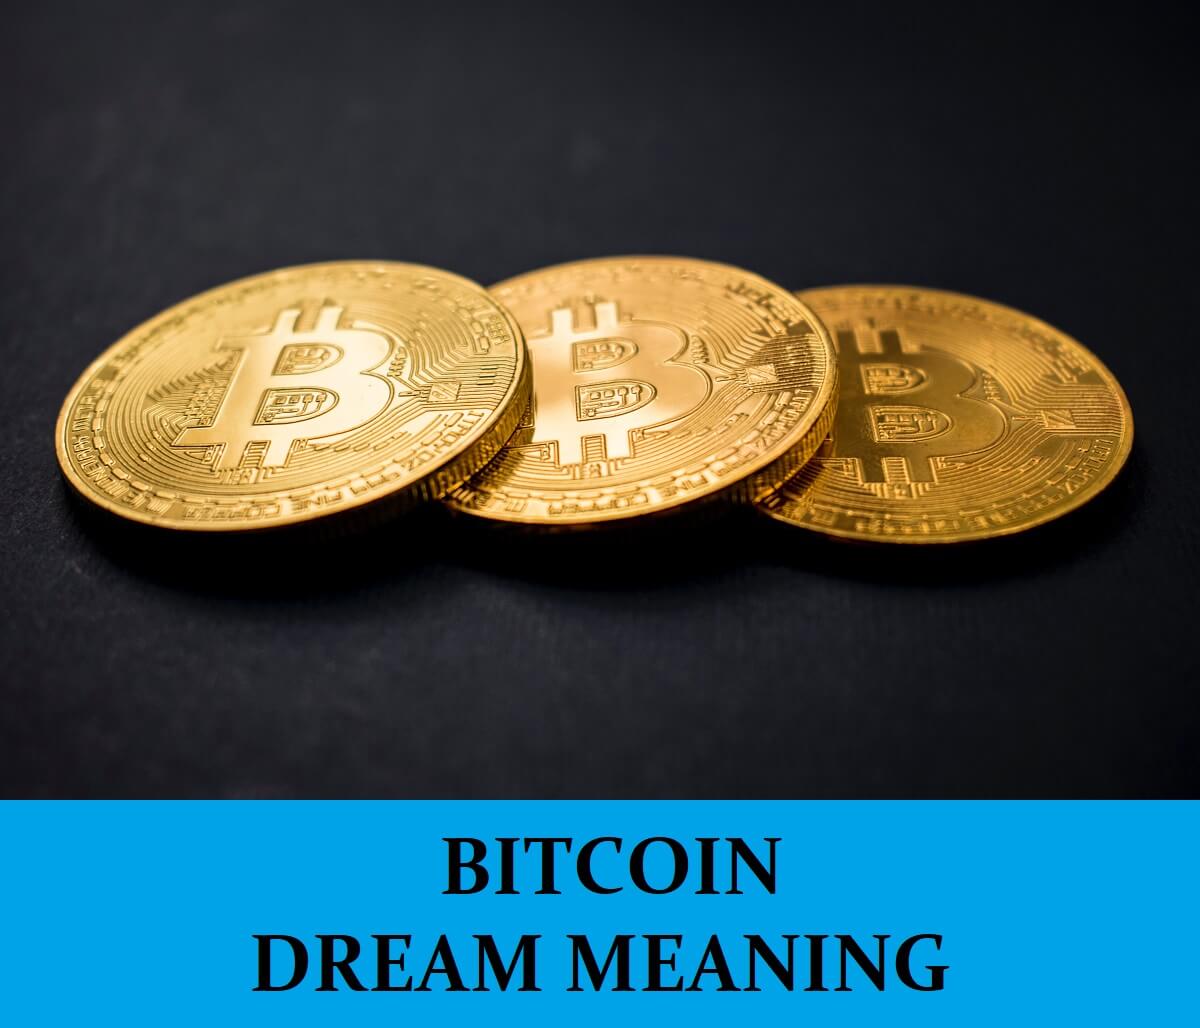 Dream About Bitcoin or Cryptocurrency